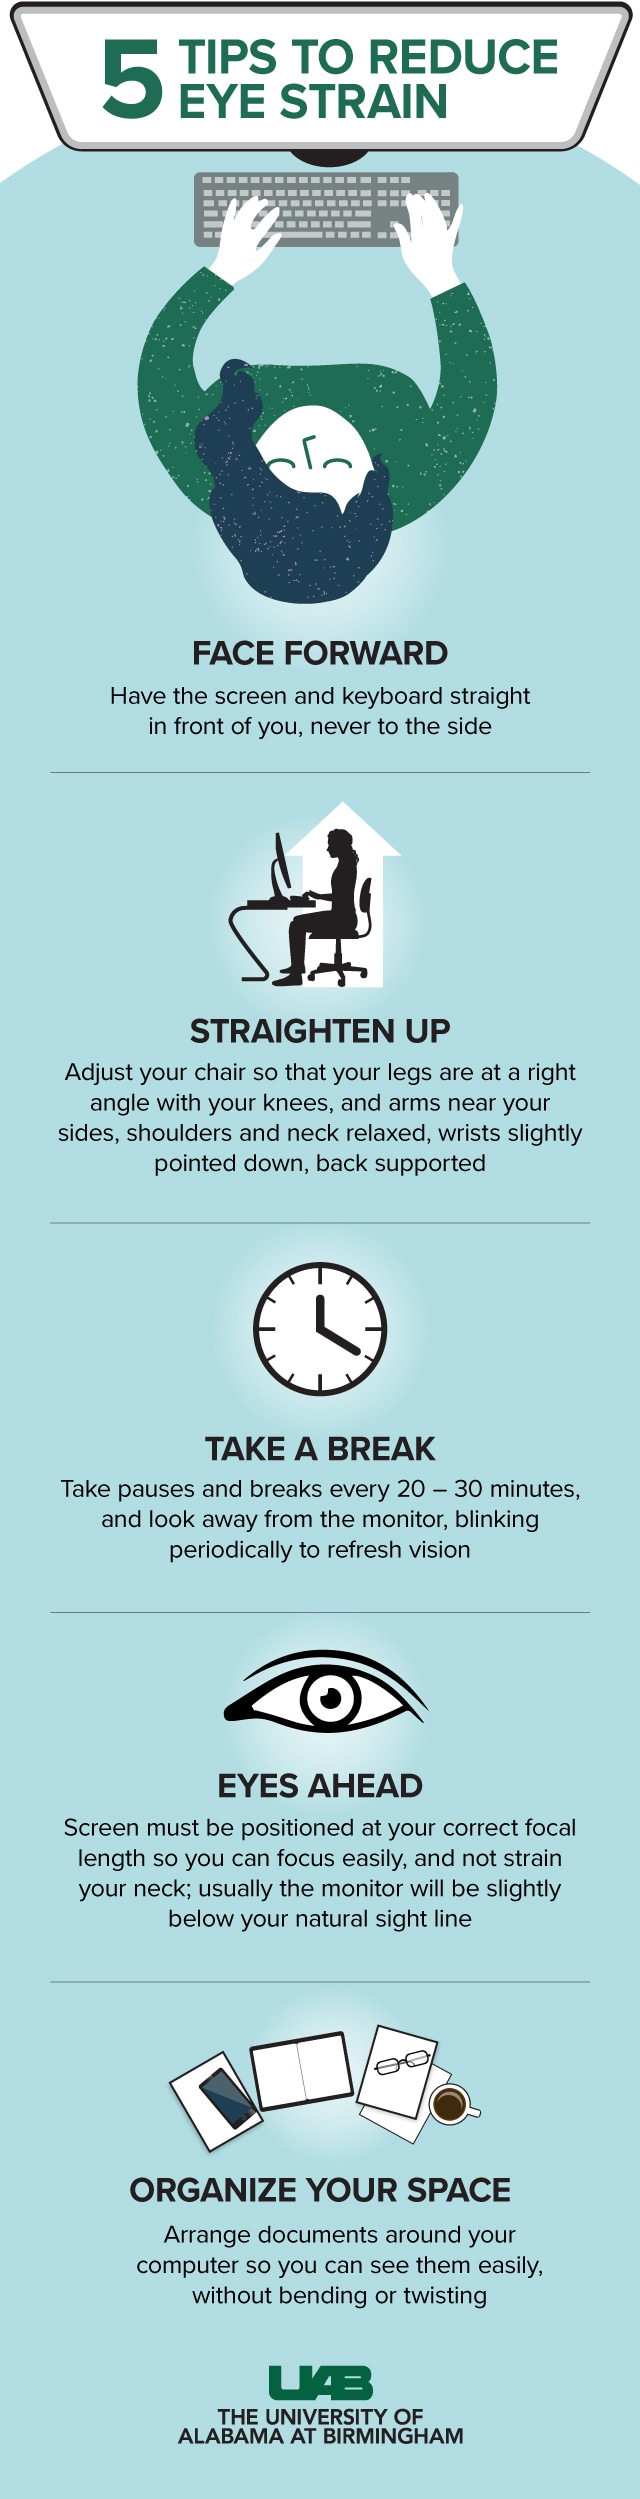 graphic showing suggestions for reducing eyestrain